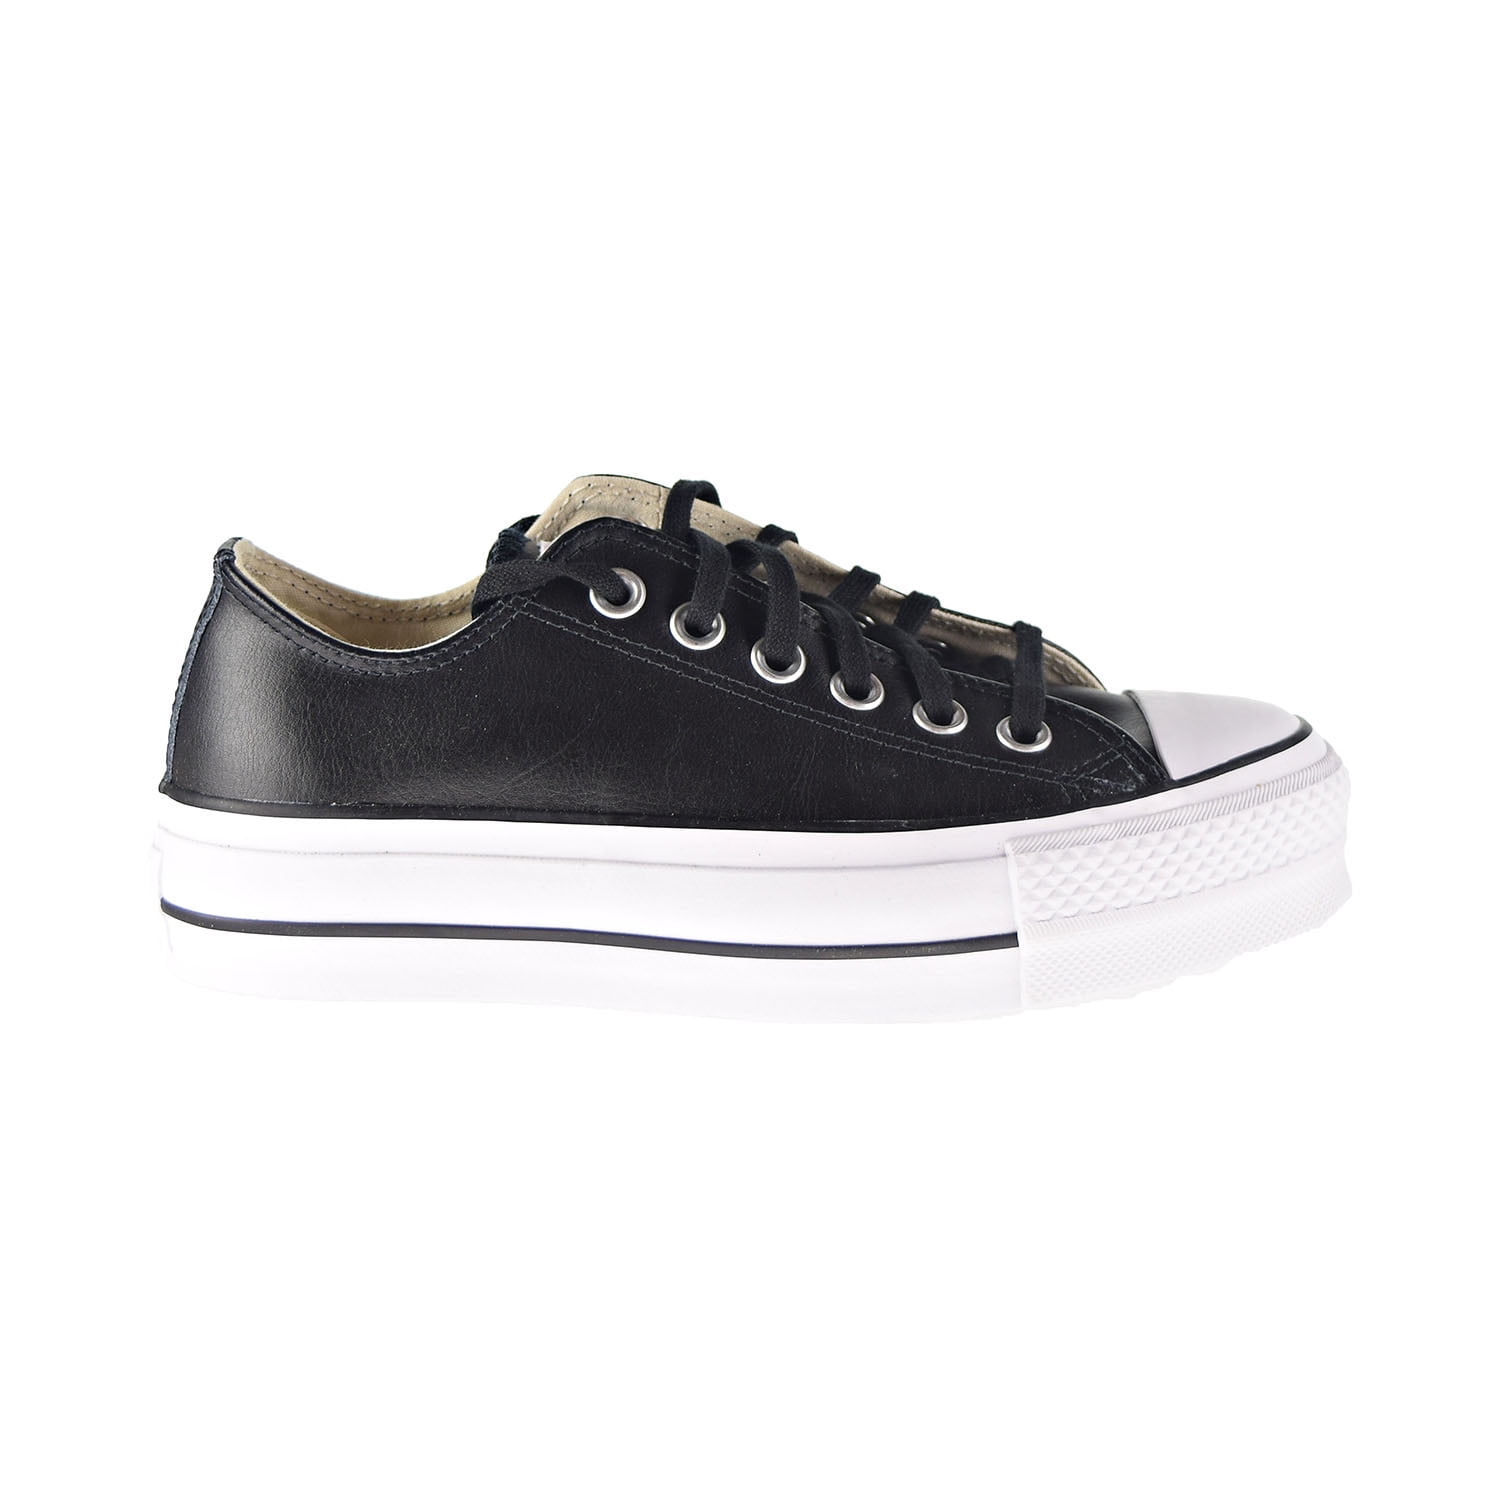 Tg 37. Converse Low with platform.